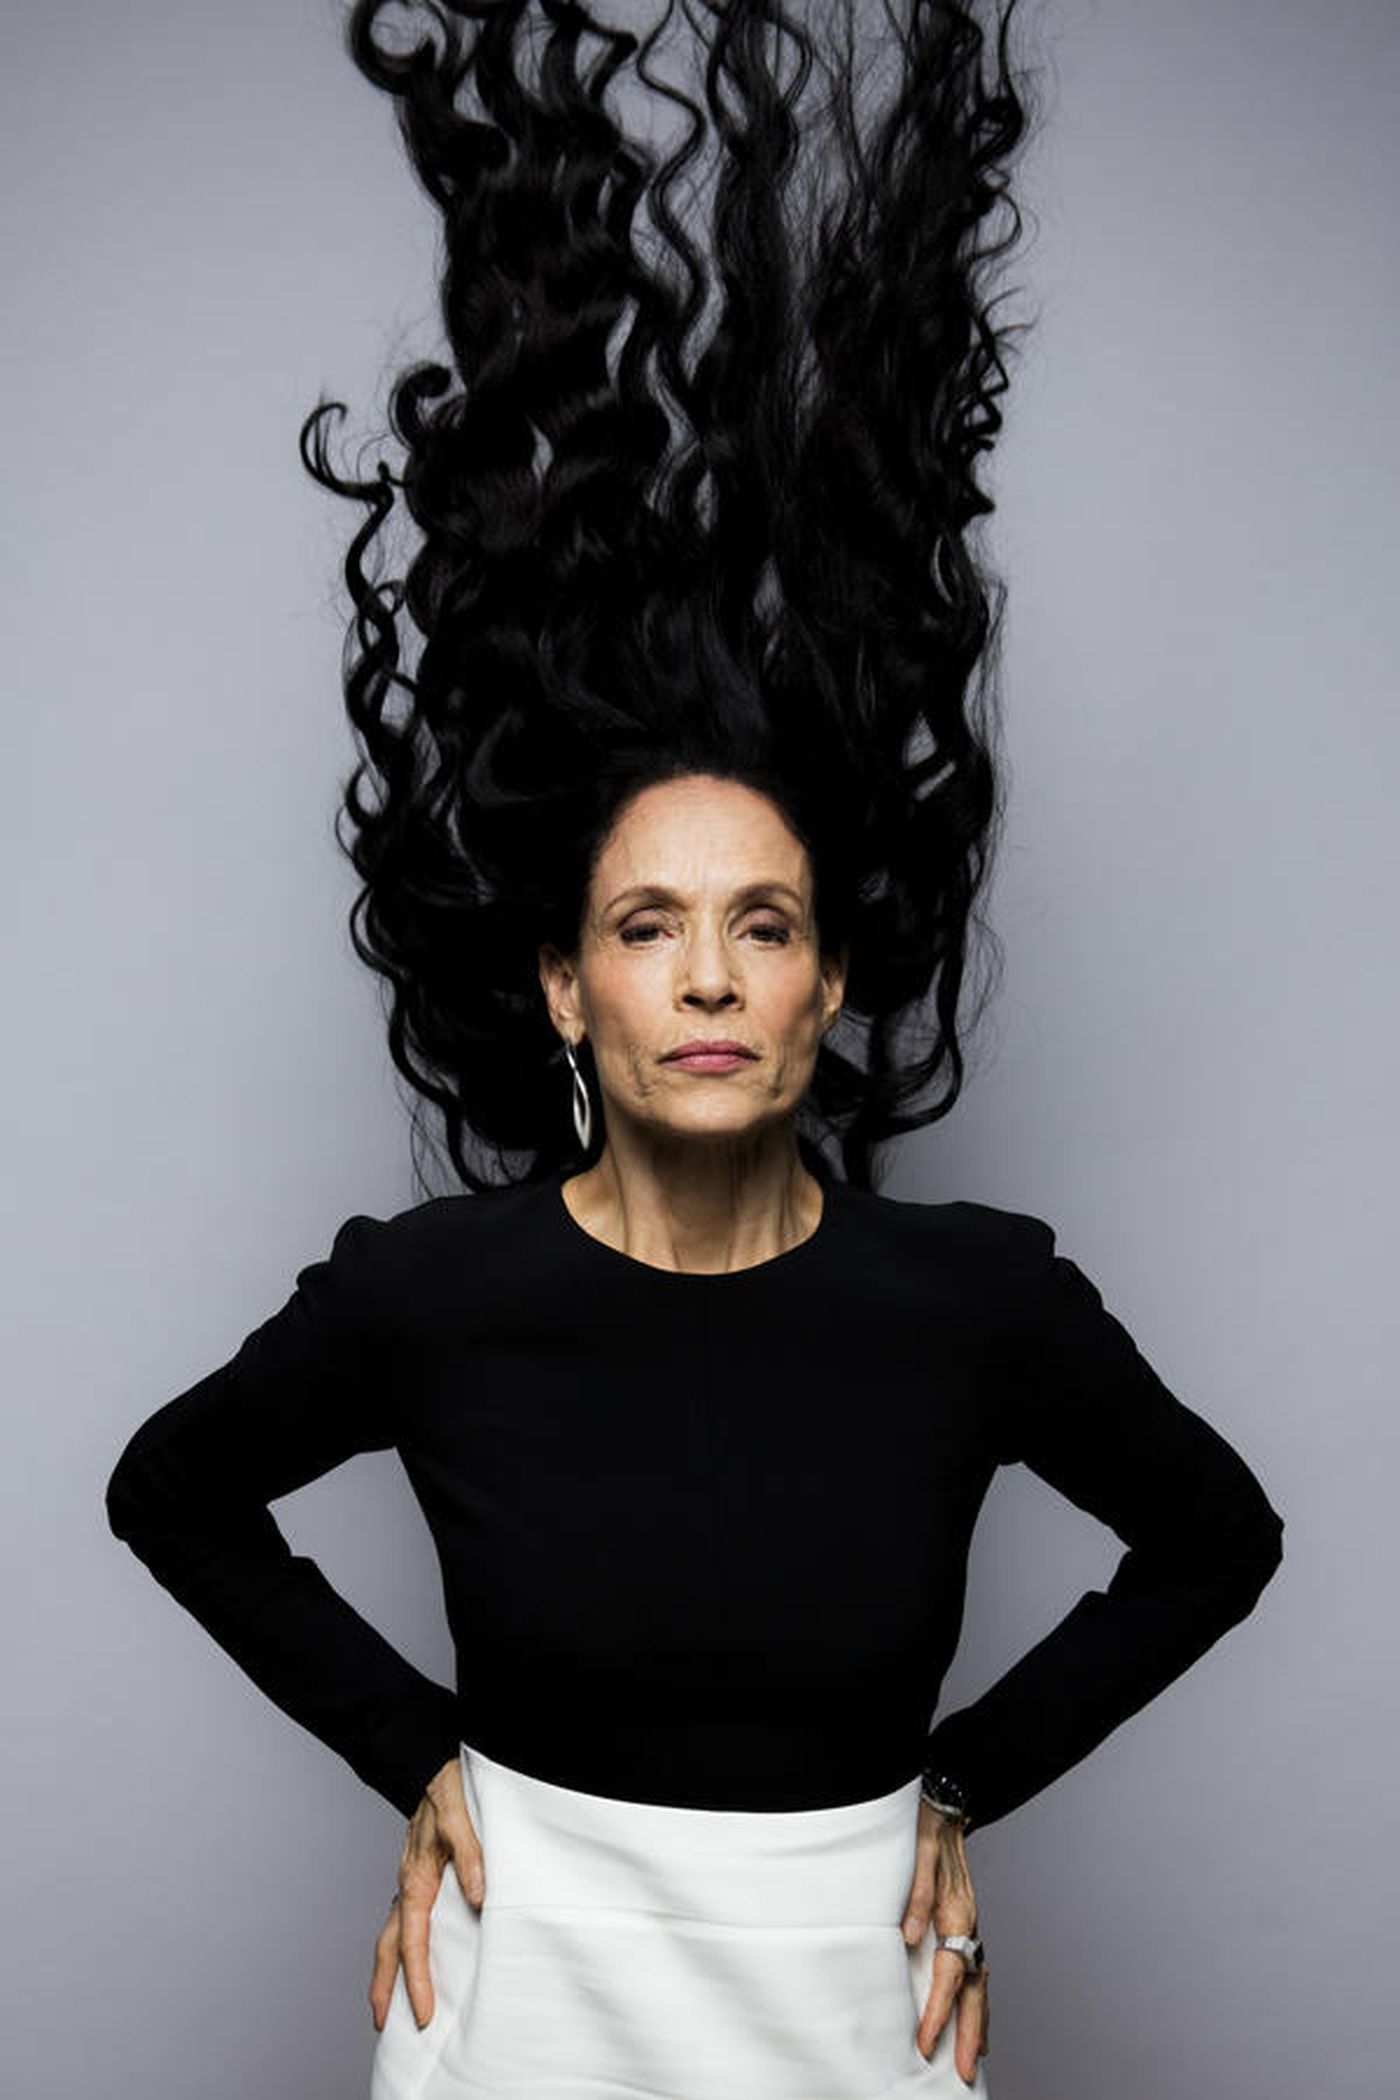 Lat Entertainment Happy Birthday Sonia Braga The Actress Turns 68 Today T Co Ppmr2zkaqp T Co 4mbnaeiiam Twitter